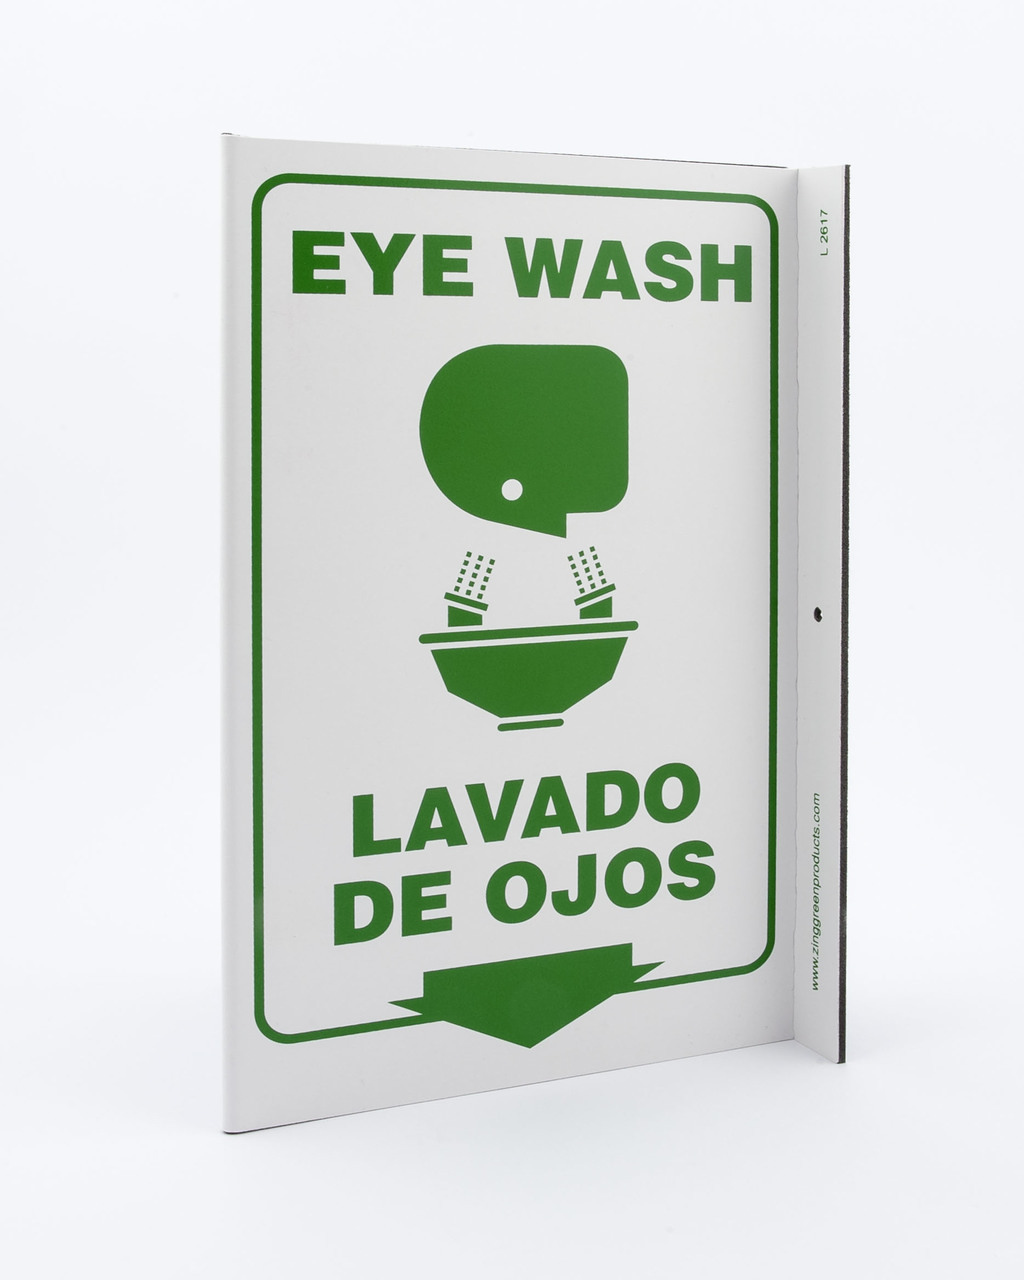 ZING Eco Safety L Sign, Eye Wash (English/Spanish), 11Hx2.5Wx8D, Recycled Plastic